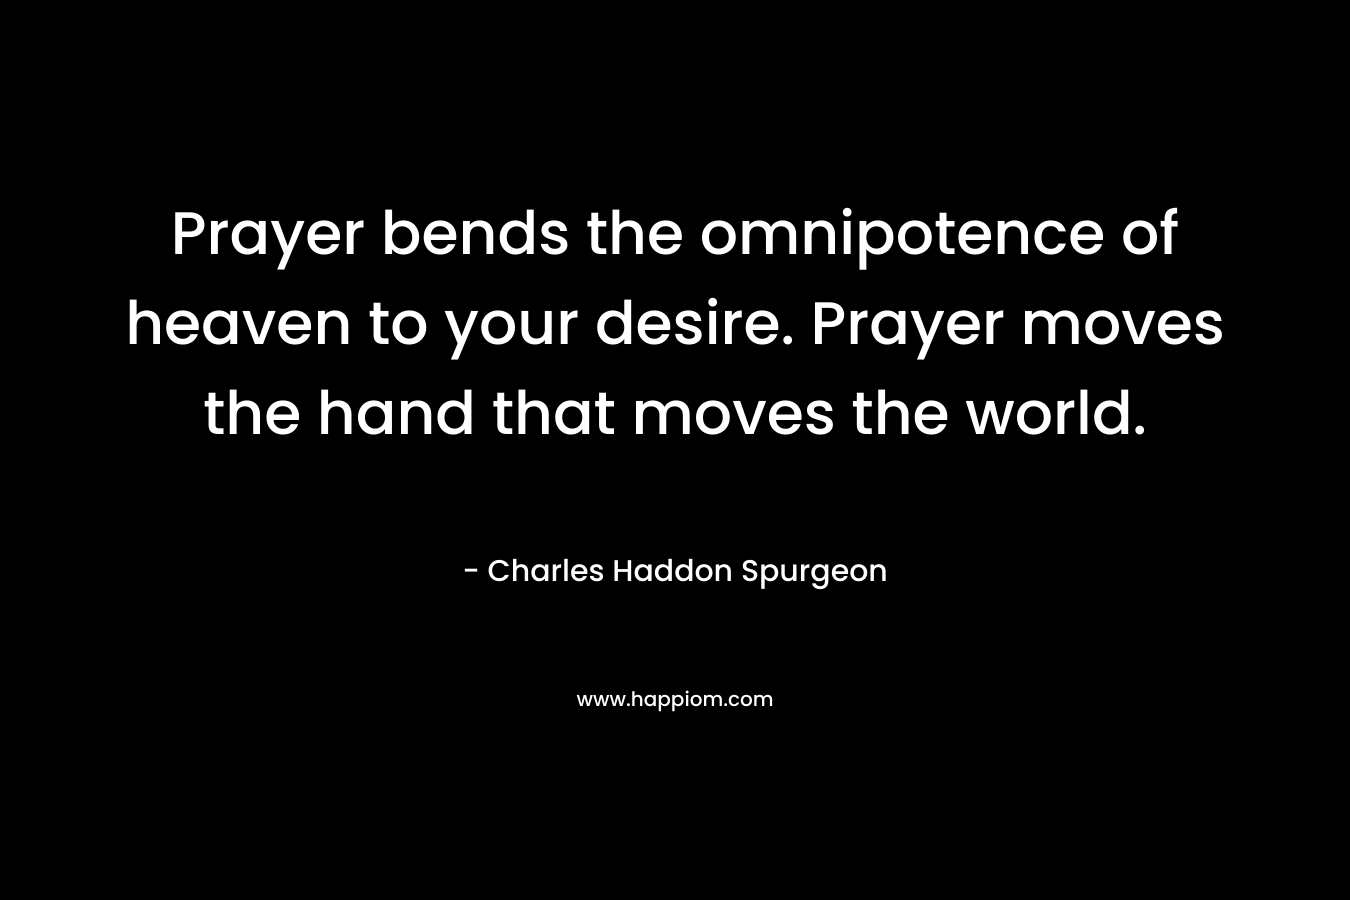 Prayer bends the omnipotence of heaven to your desire. Prayer moves the hand that moves the world.